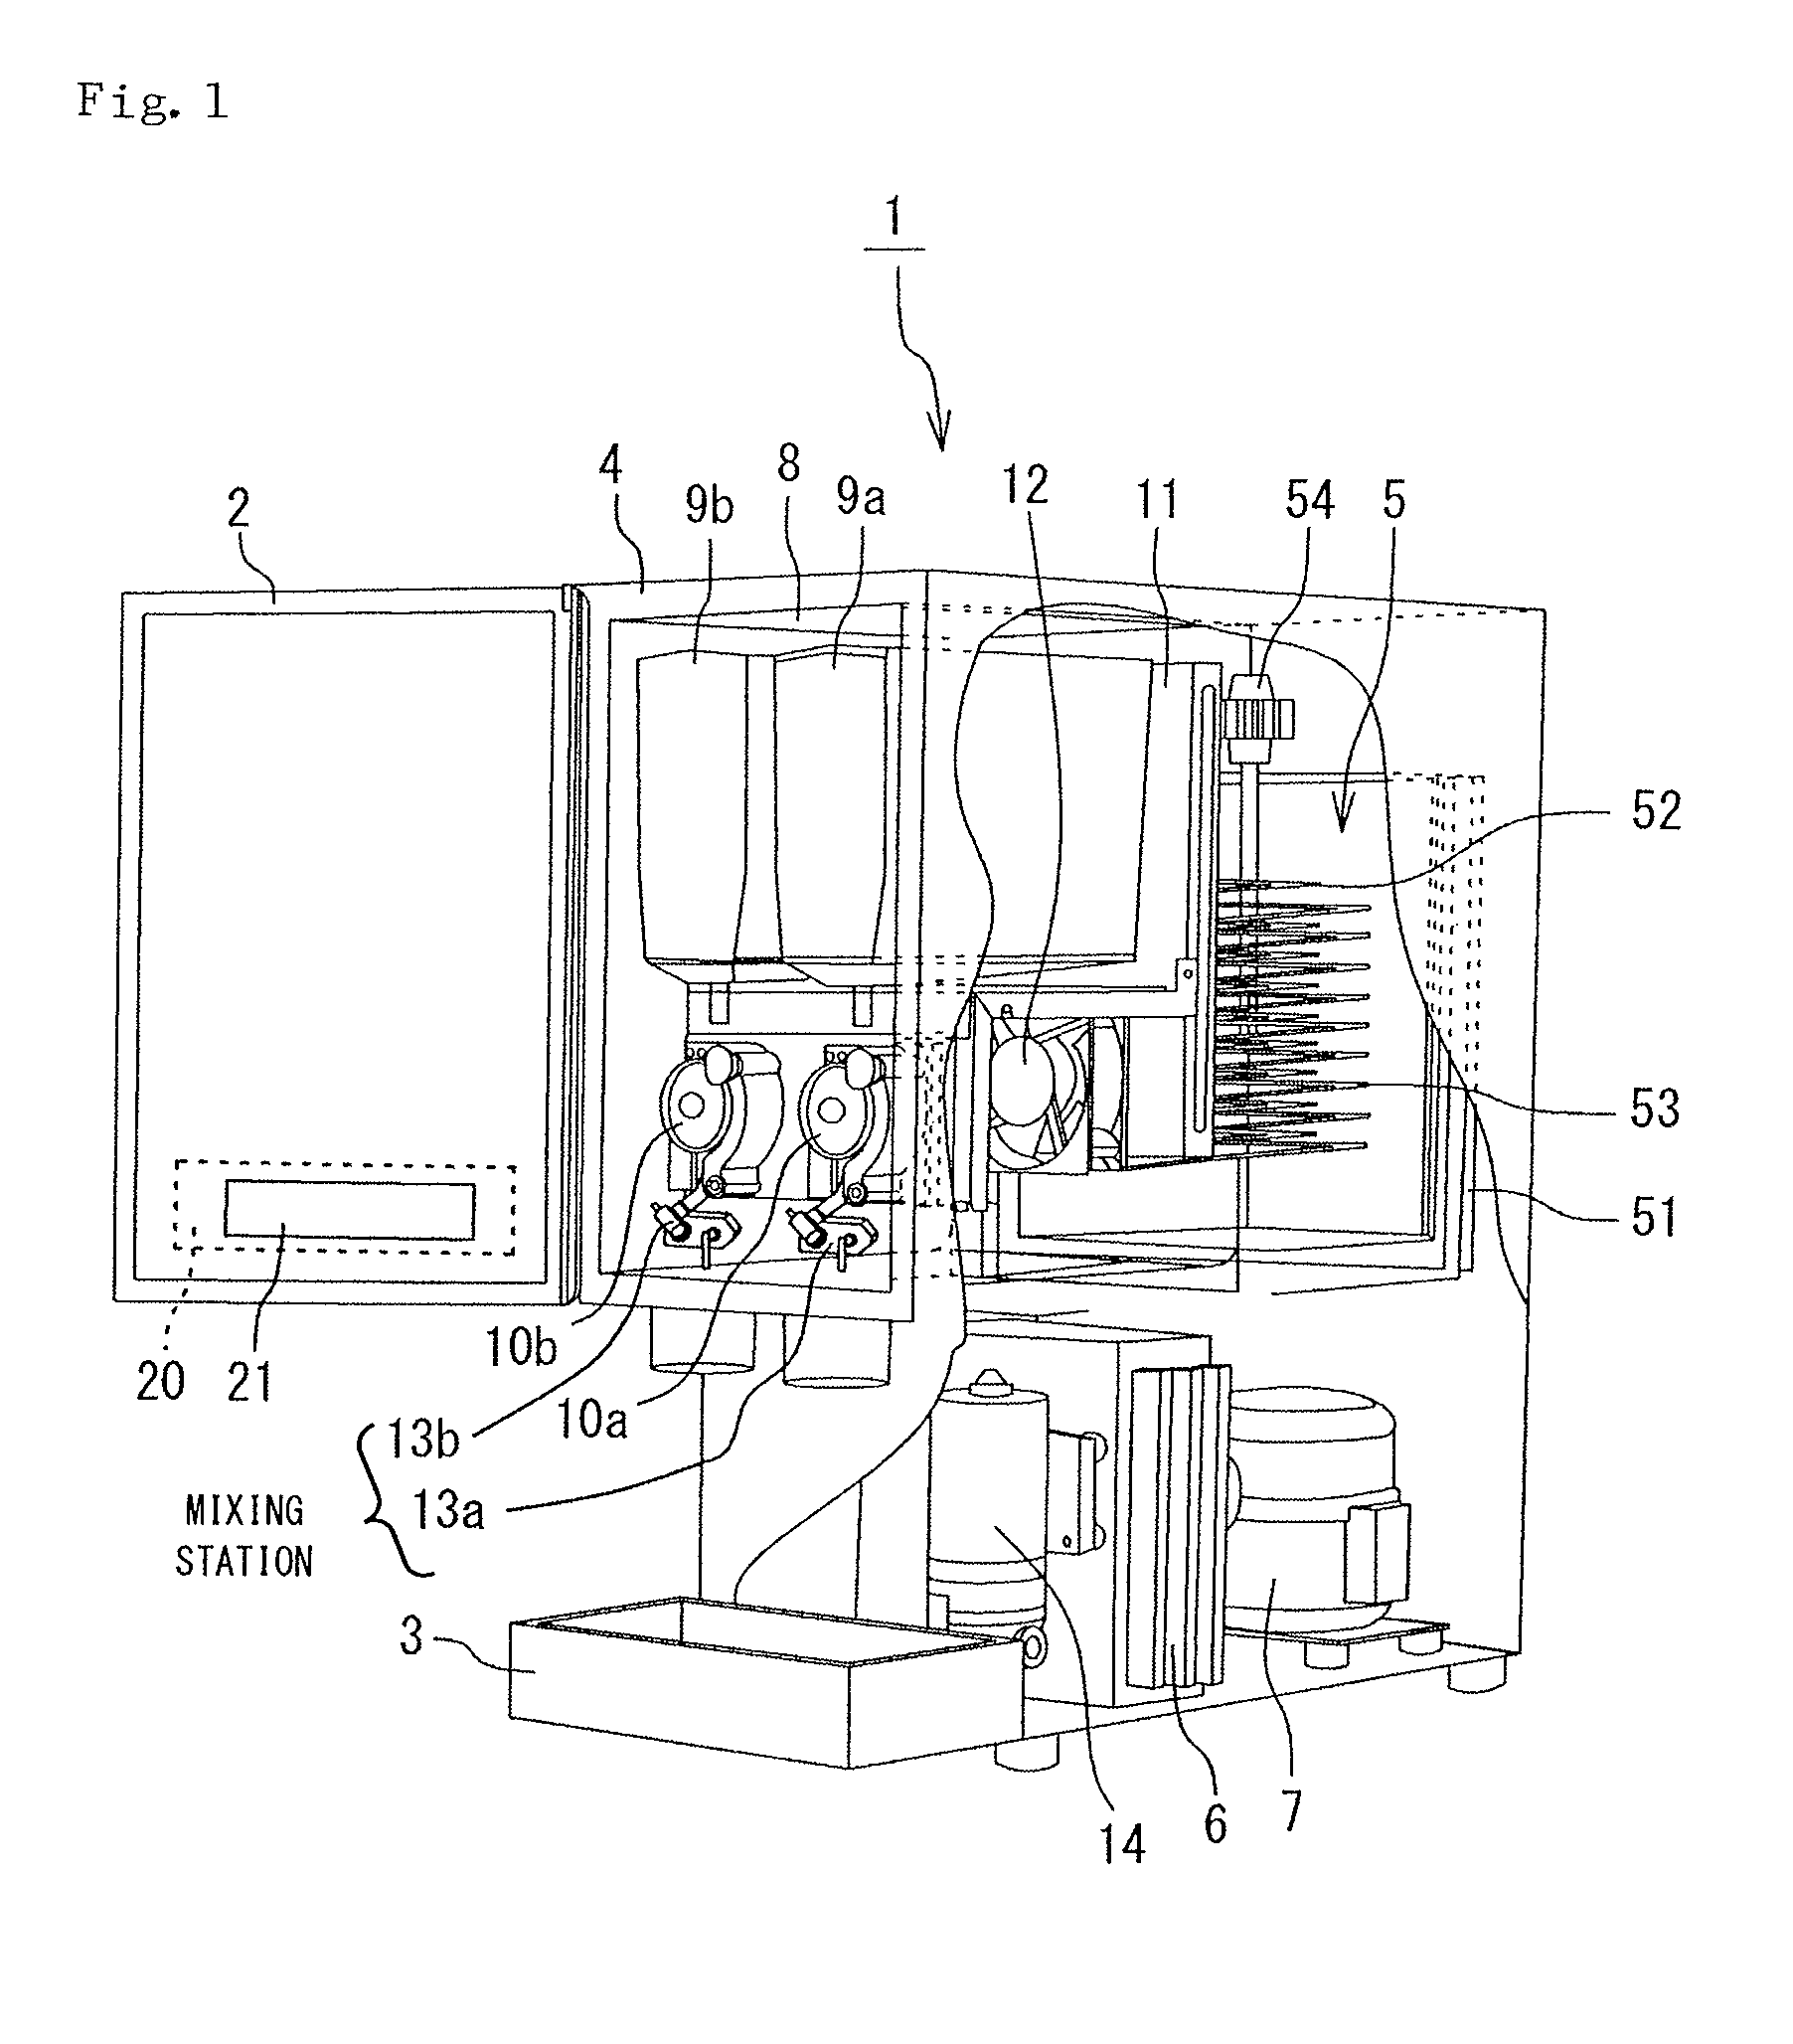 Apparatus for and method of adjusting dilution ratio in beverage dispenser